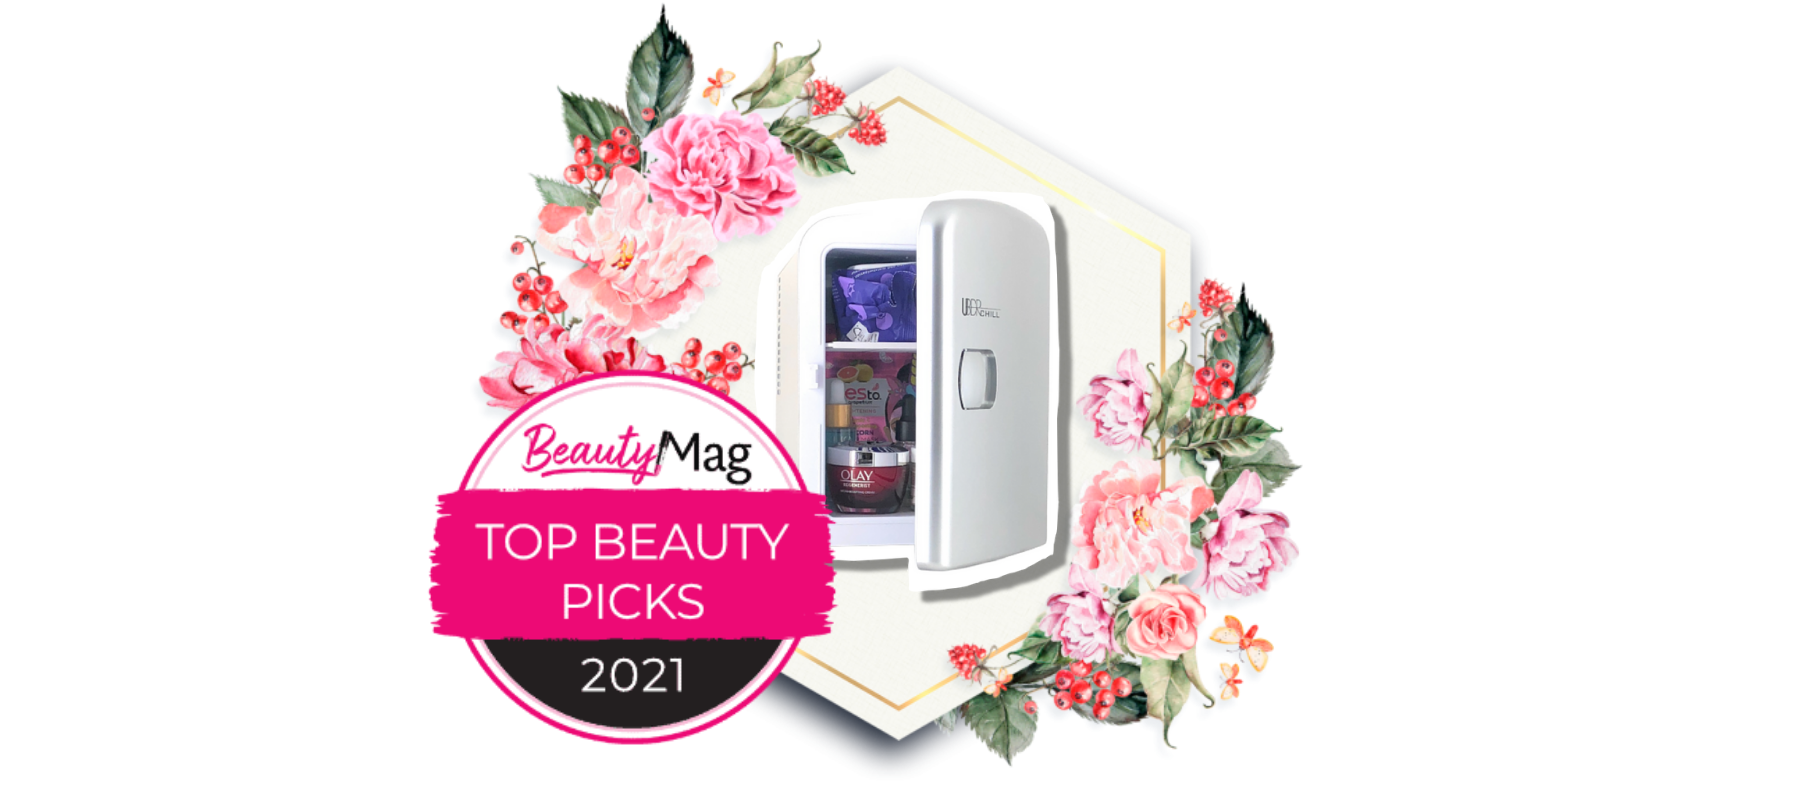 Uber Chill Beauty Fridge Featured as a top Beauty Mag Pick for 2021